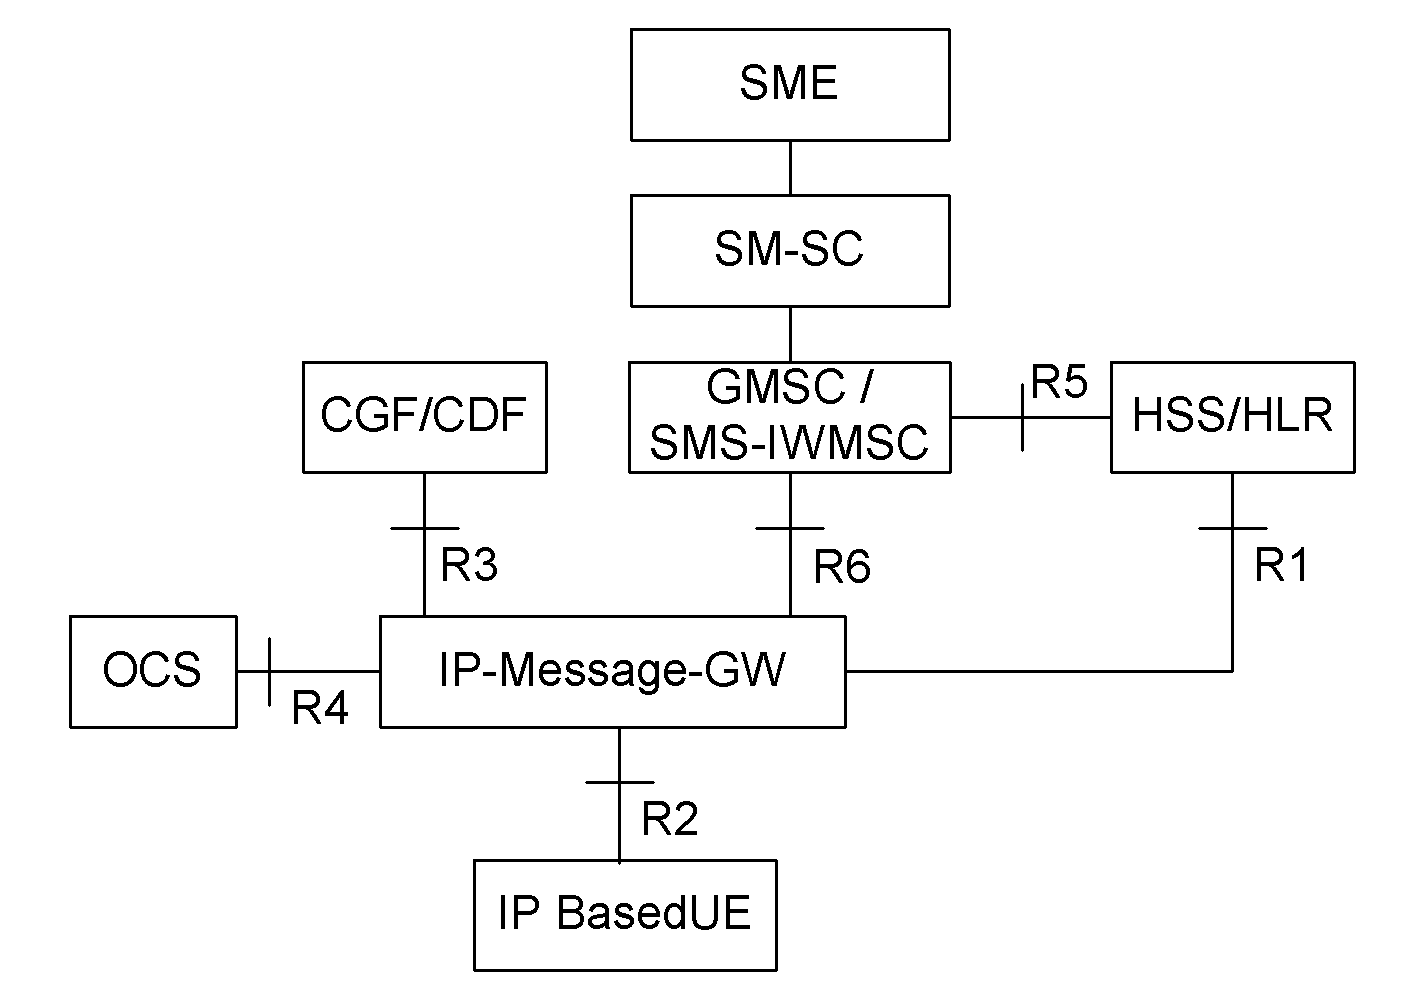 Method for realizing mobile data service by IP (Internet protocol) user based on IP access